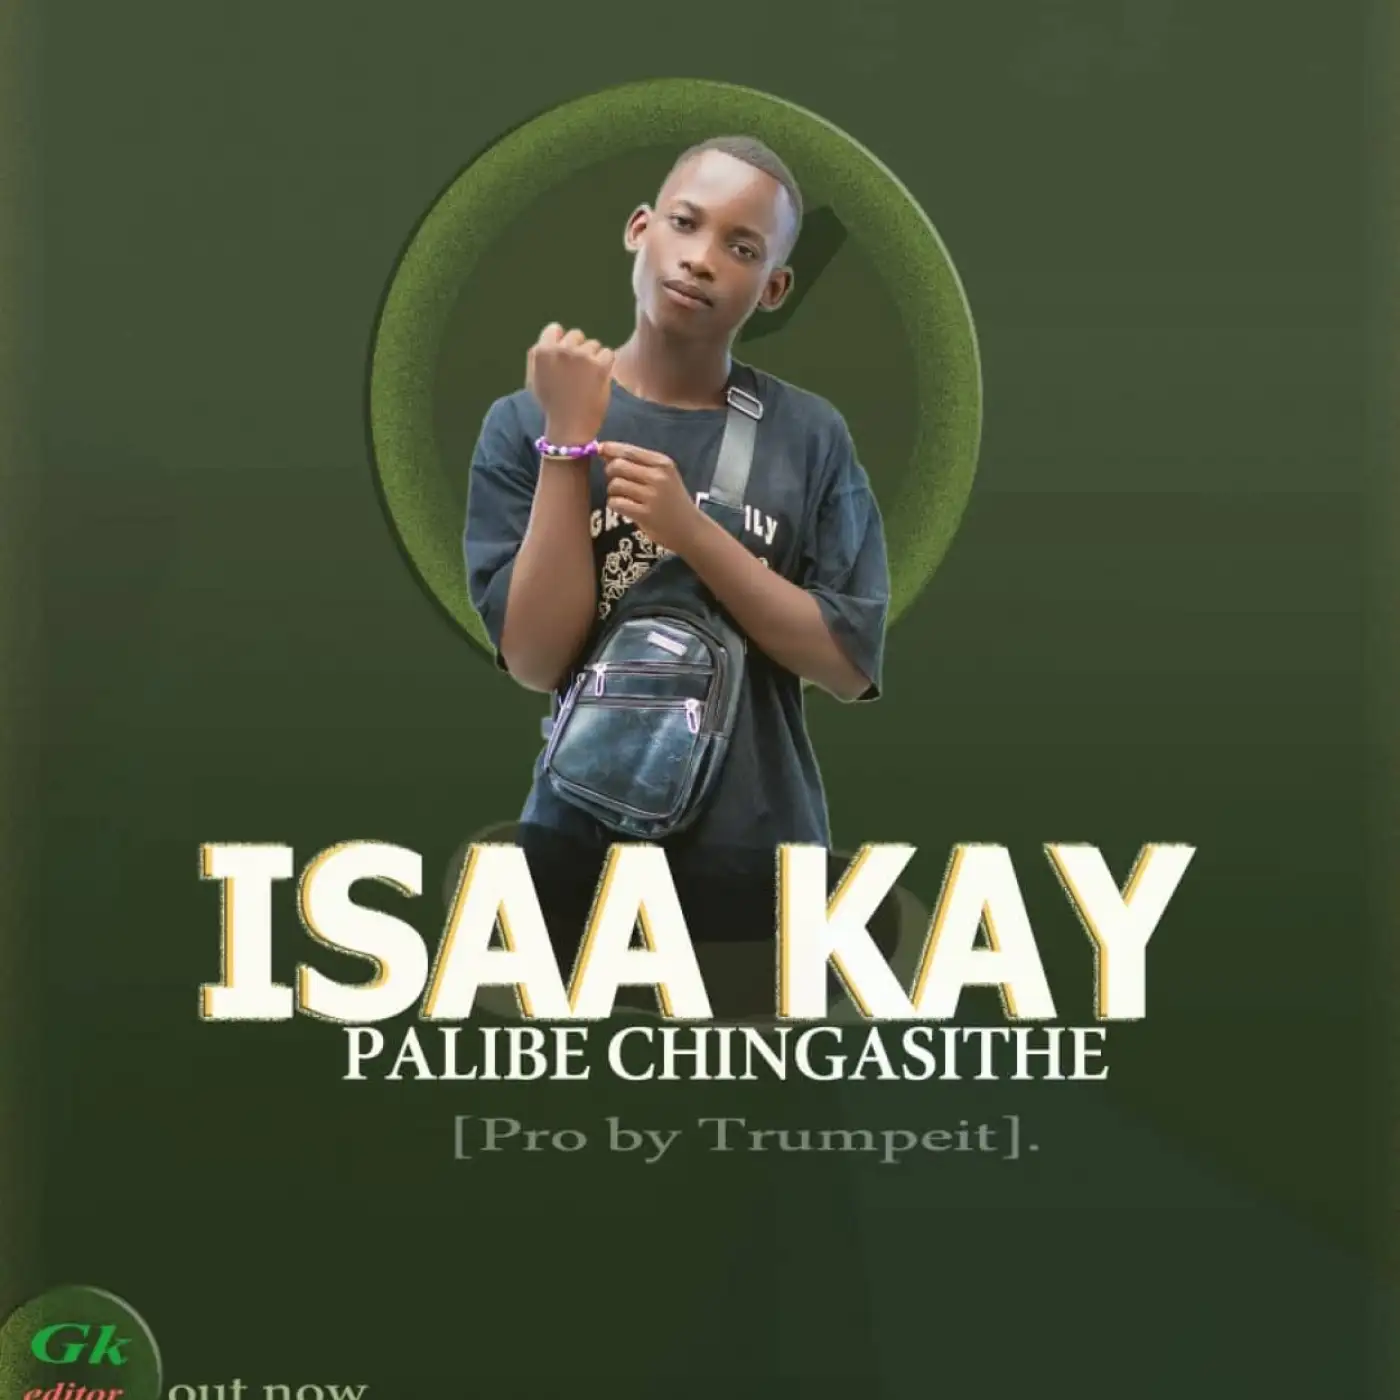 isaa-kay-palibe-chingasinthe-prod-trumpeit-mp3-download-mp3 download